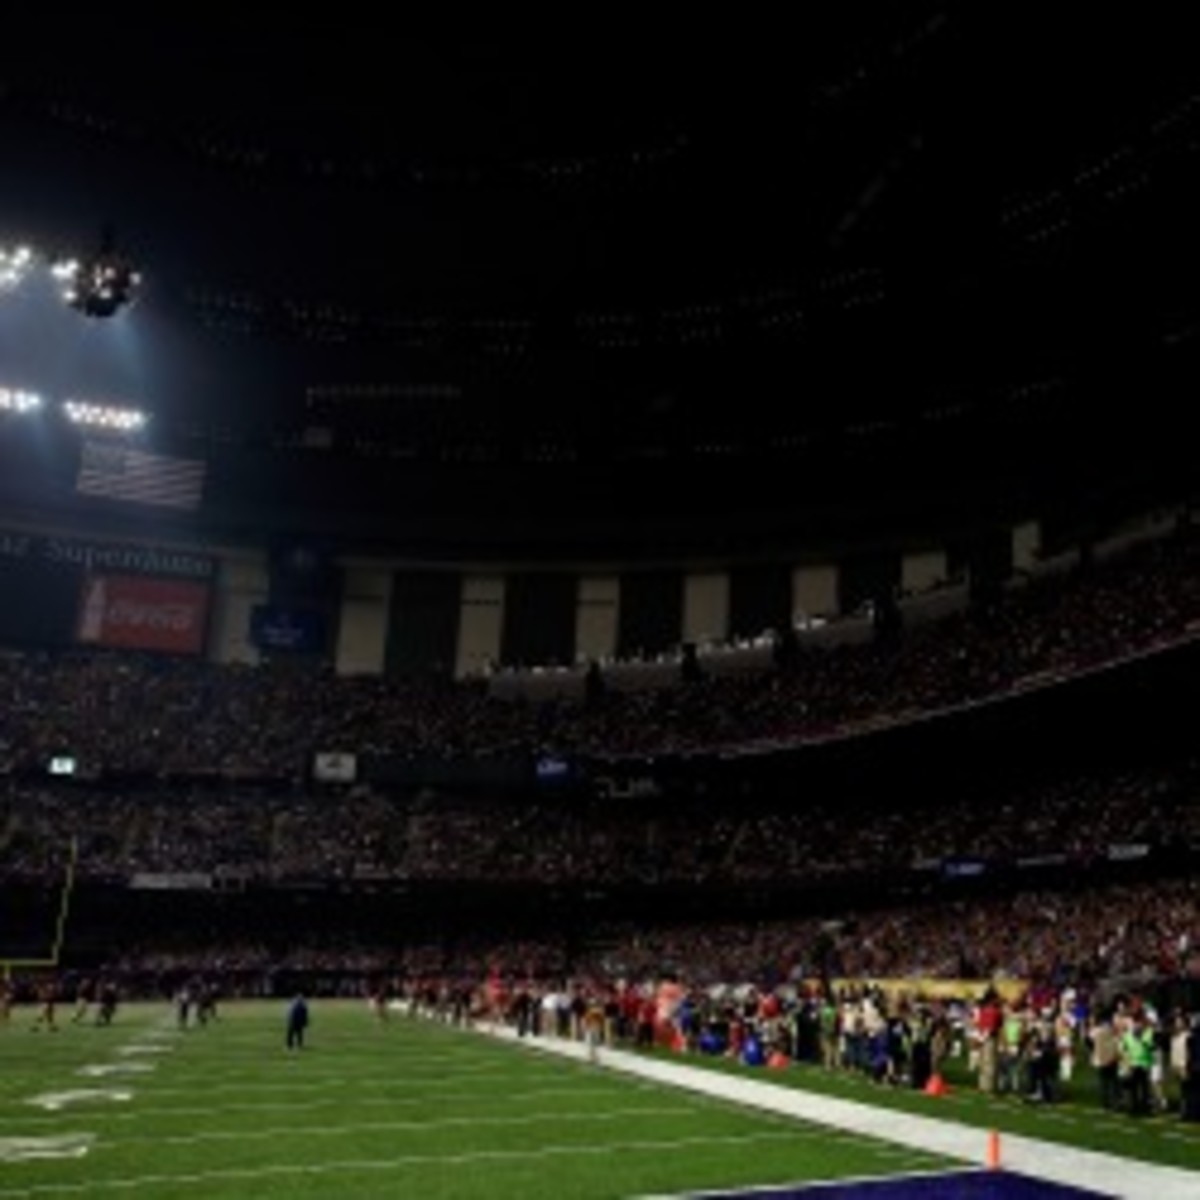 A blackout at Mercedes-Benz Superdome during  Super Bowl XLVII caused a 34-minute delay. (Jamie Squire/Getty Images)